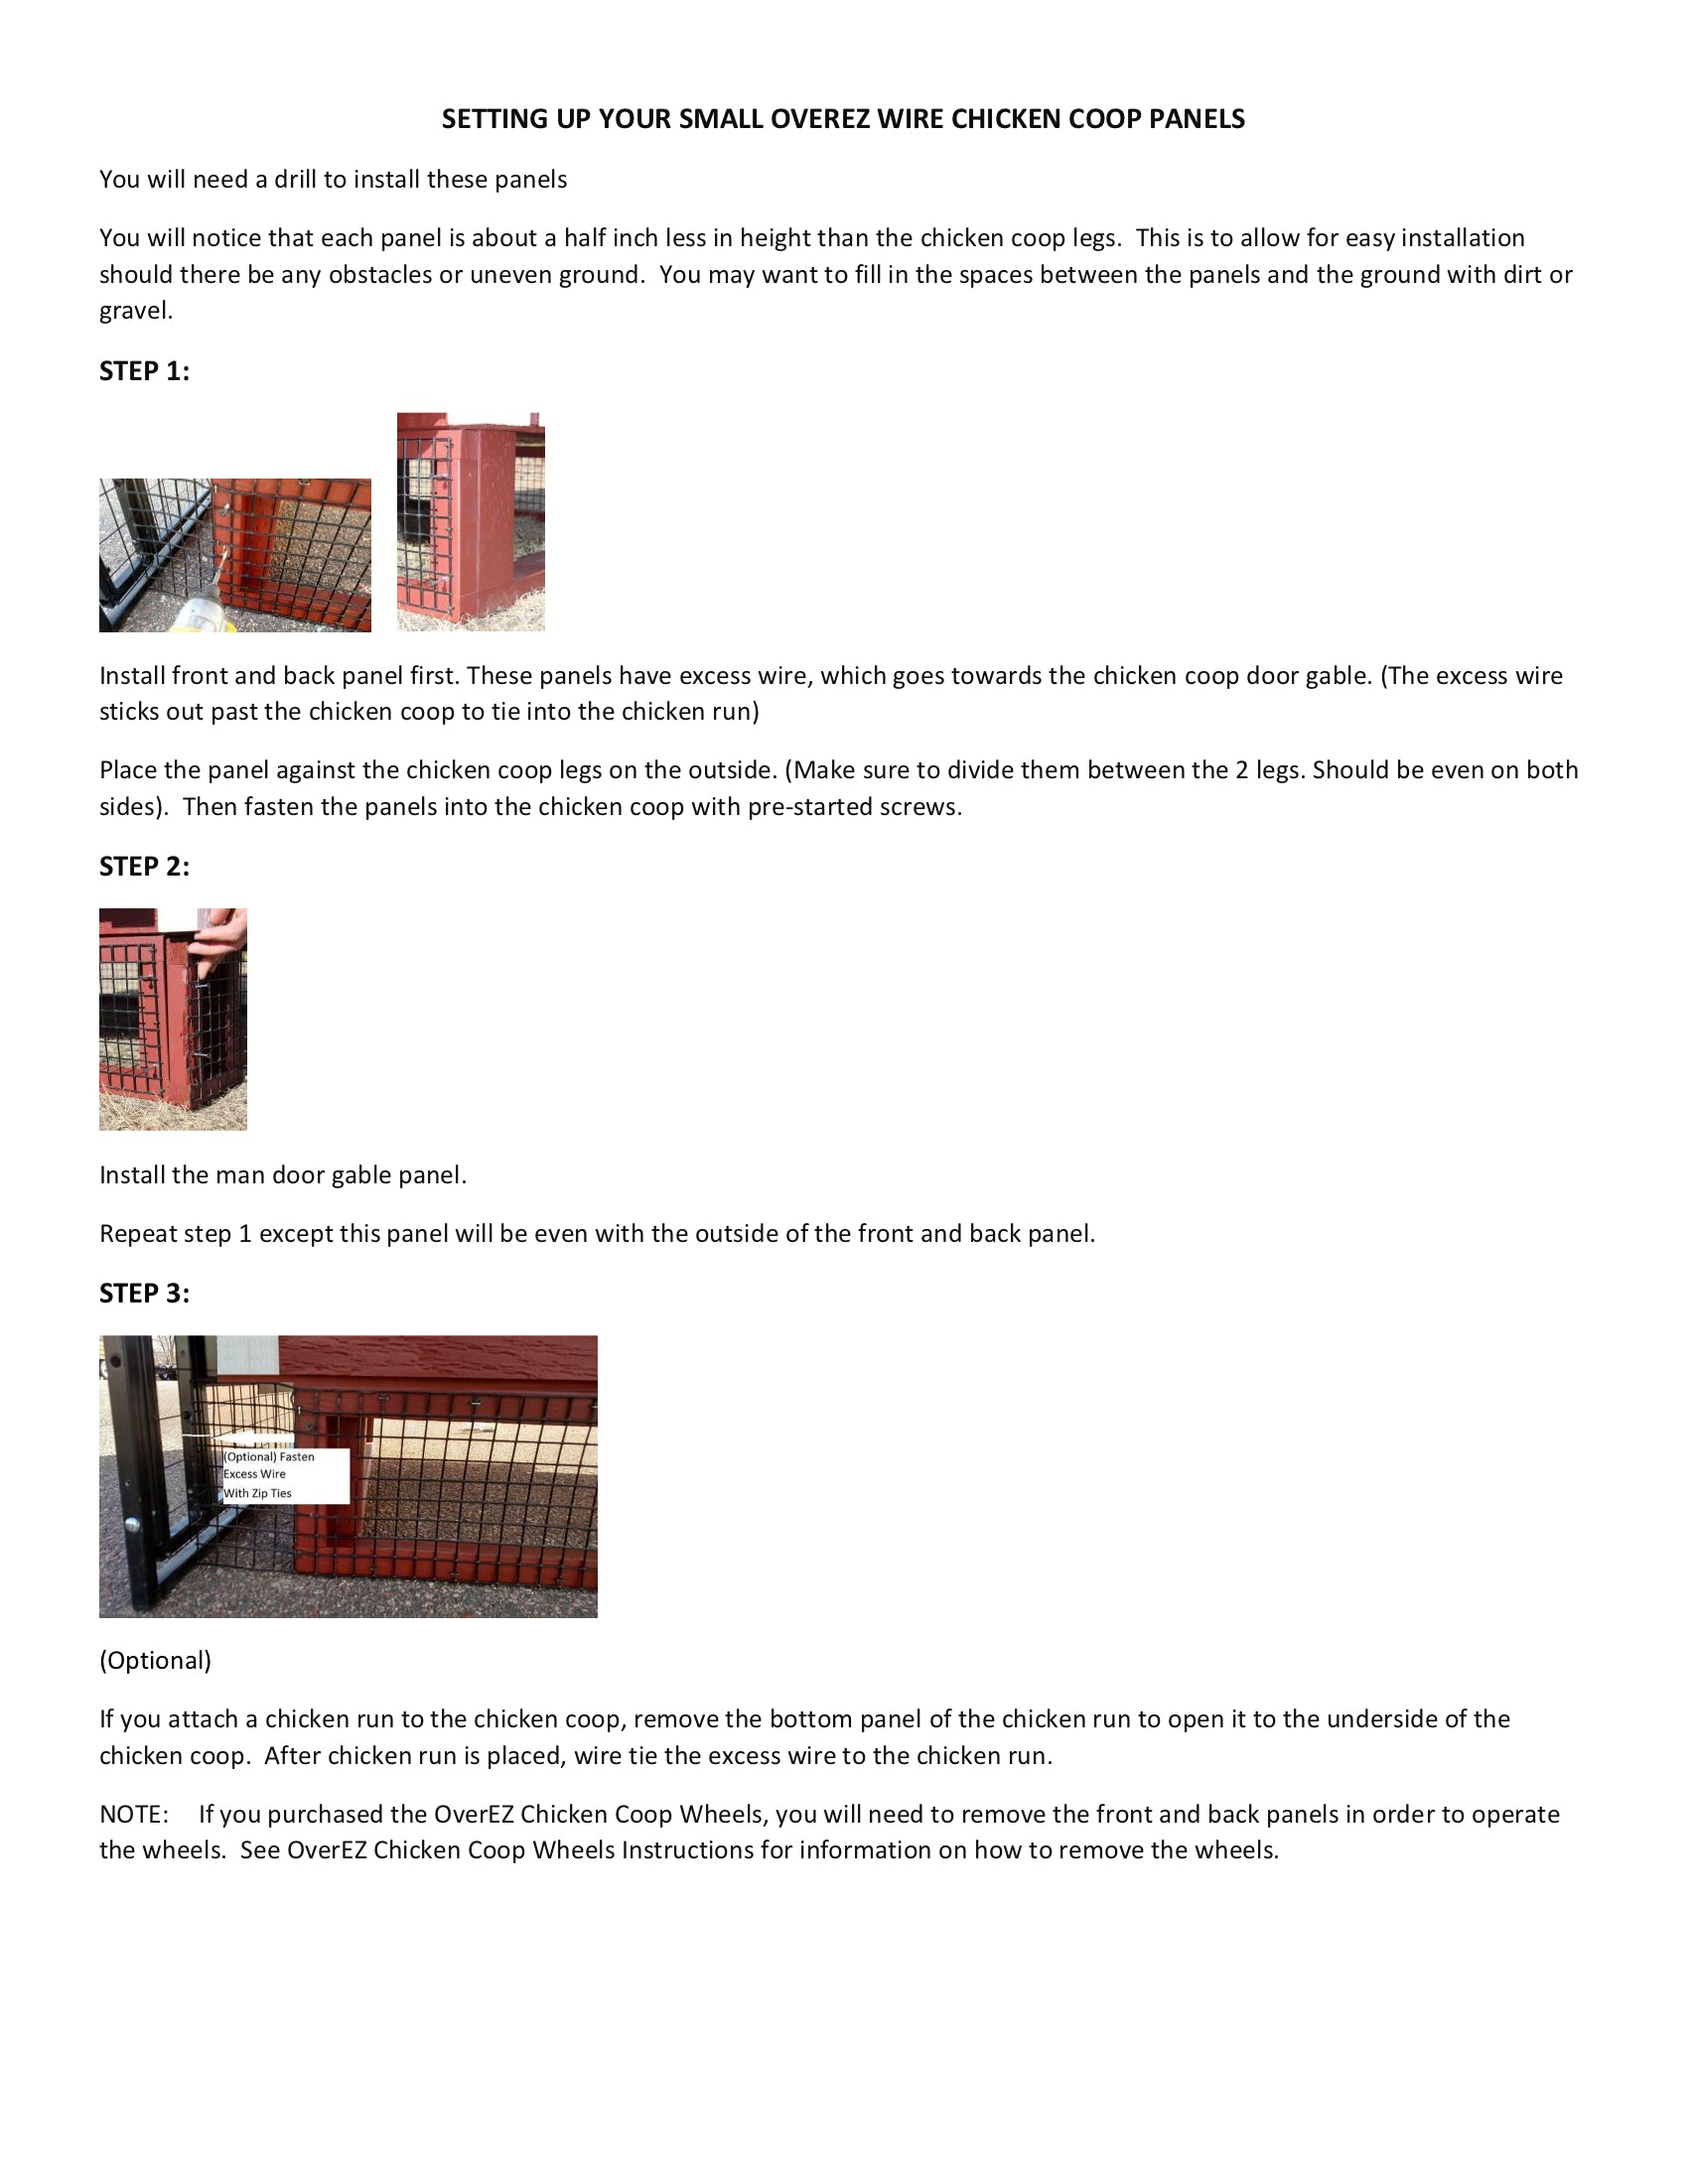 Small OverEZ Wire Chicken Coop Panels Instructions 2